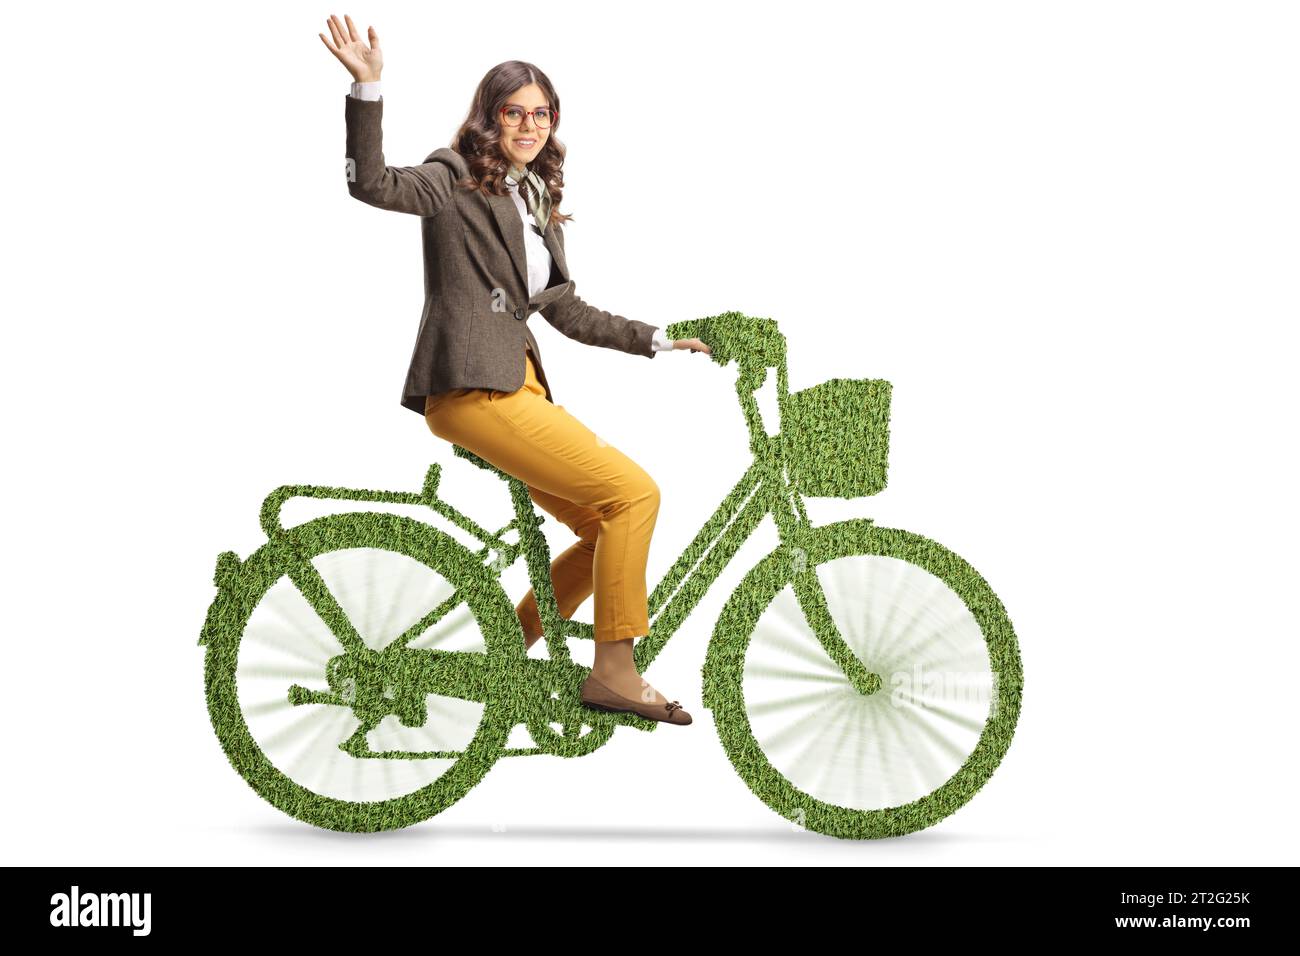 Young woman riding a bicycle made of grass and waving isolated on white background Stock Photo